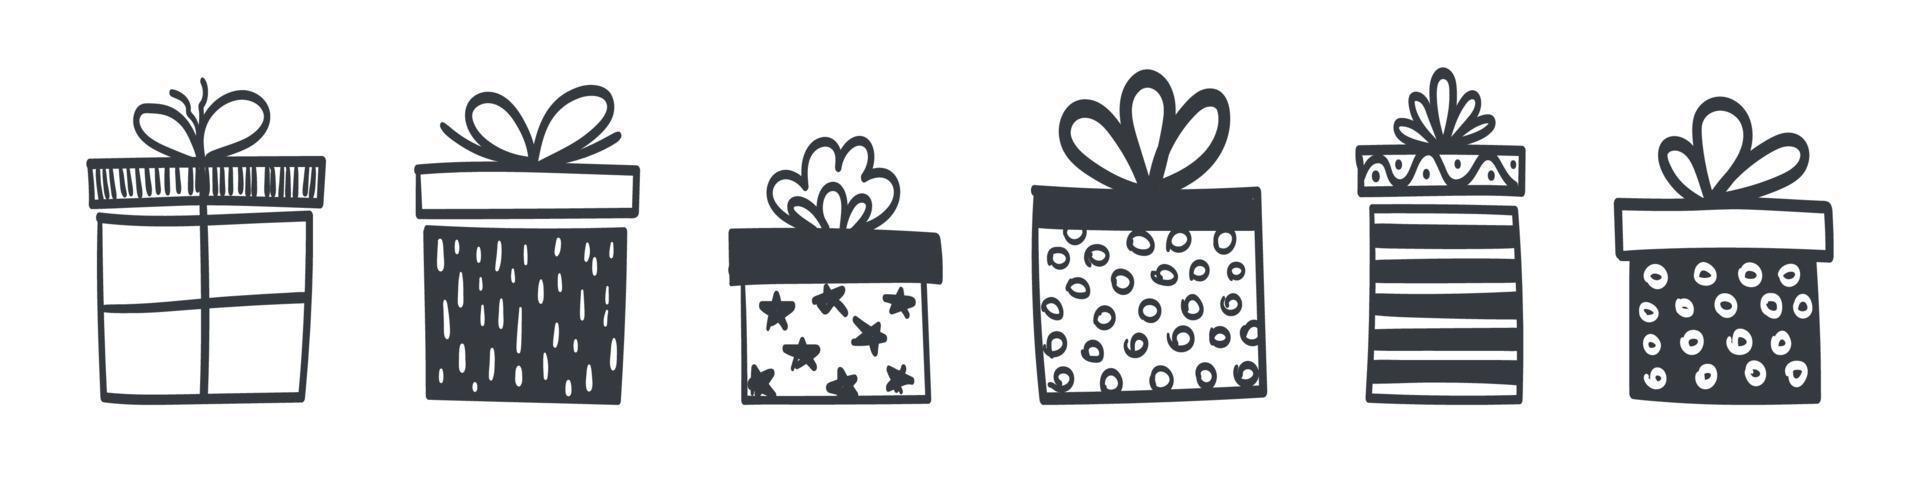 Gift box icons. Set of hand drawn gift boxes different style and forms. Vector illustration